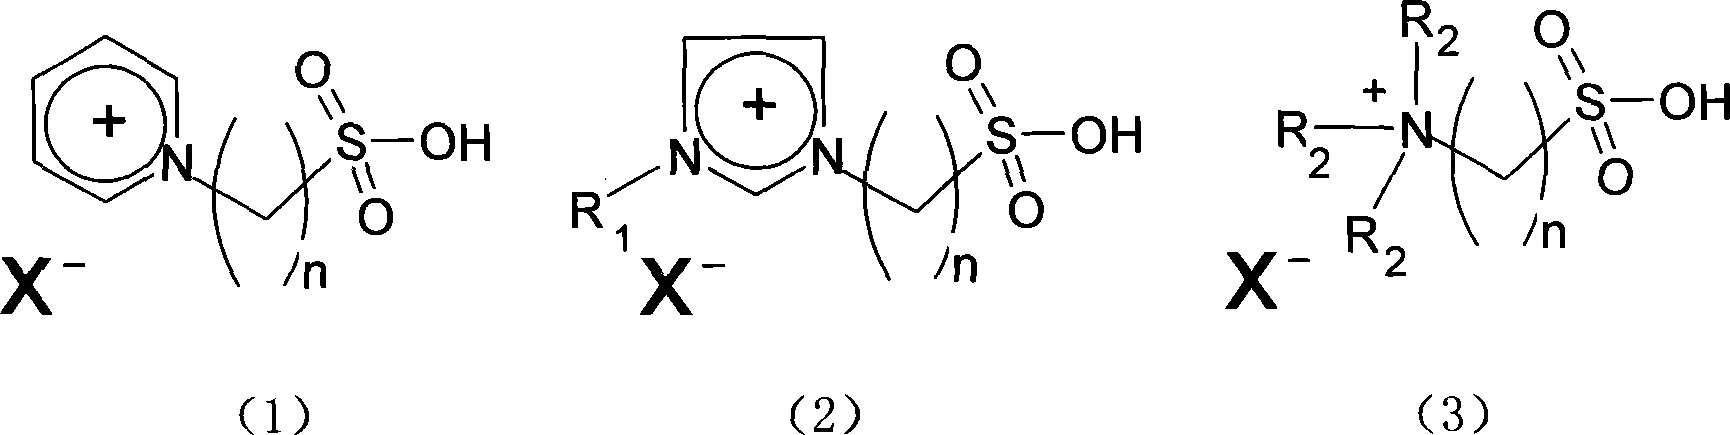 Brphinsted-Lewis acidic ionic liquid and application thereof in rosin polymerization reaction